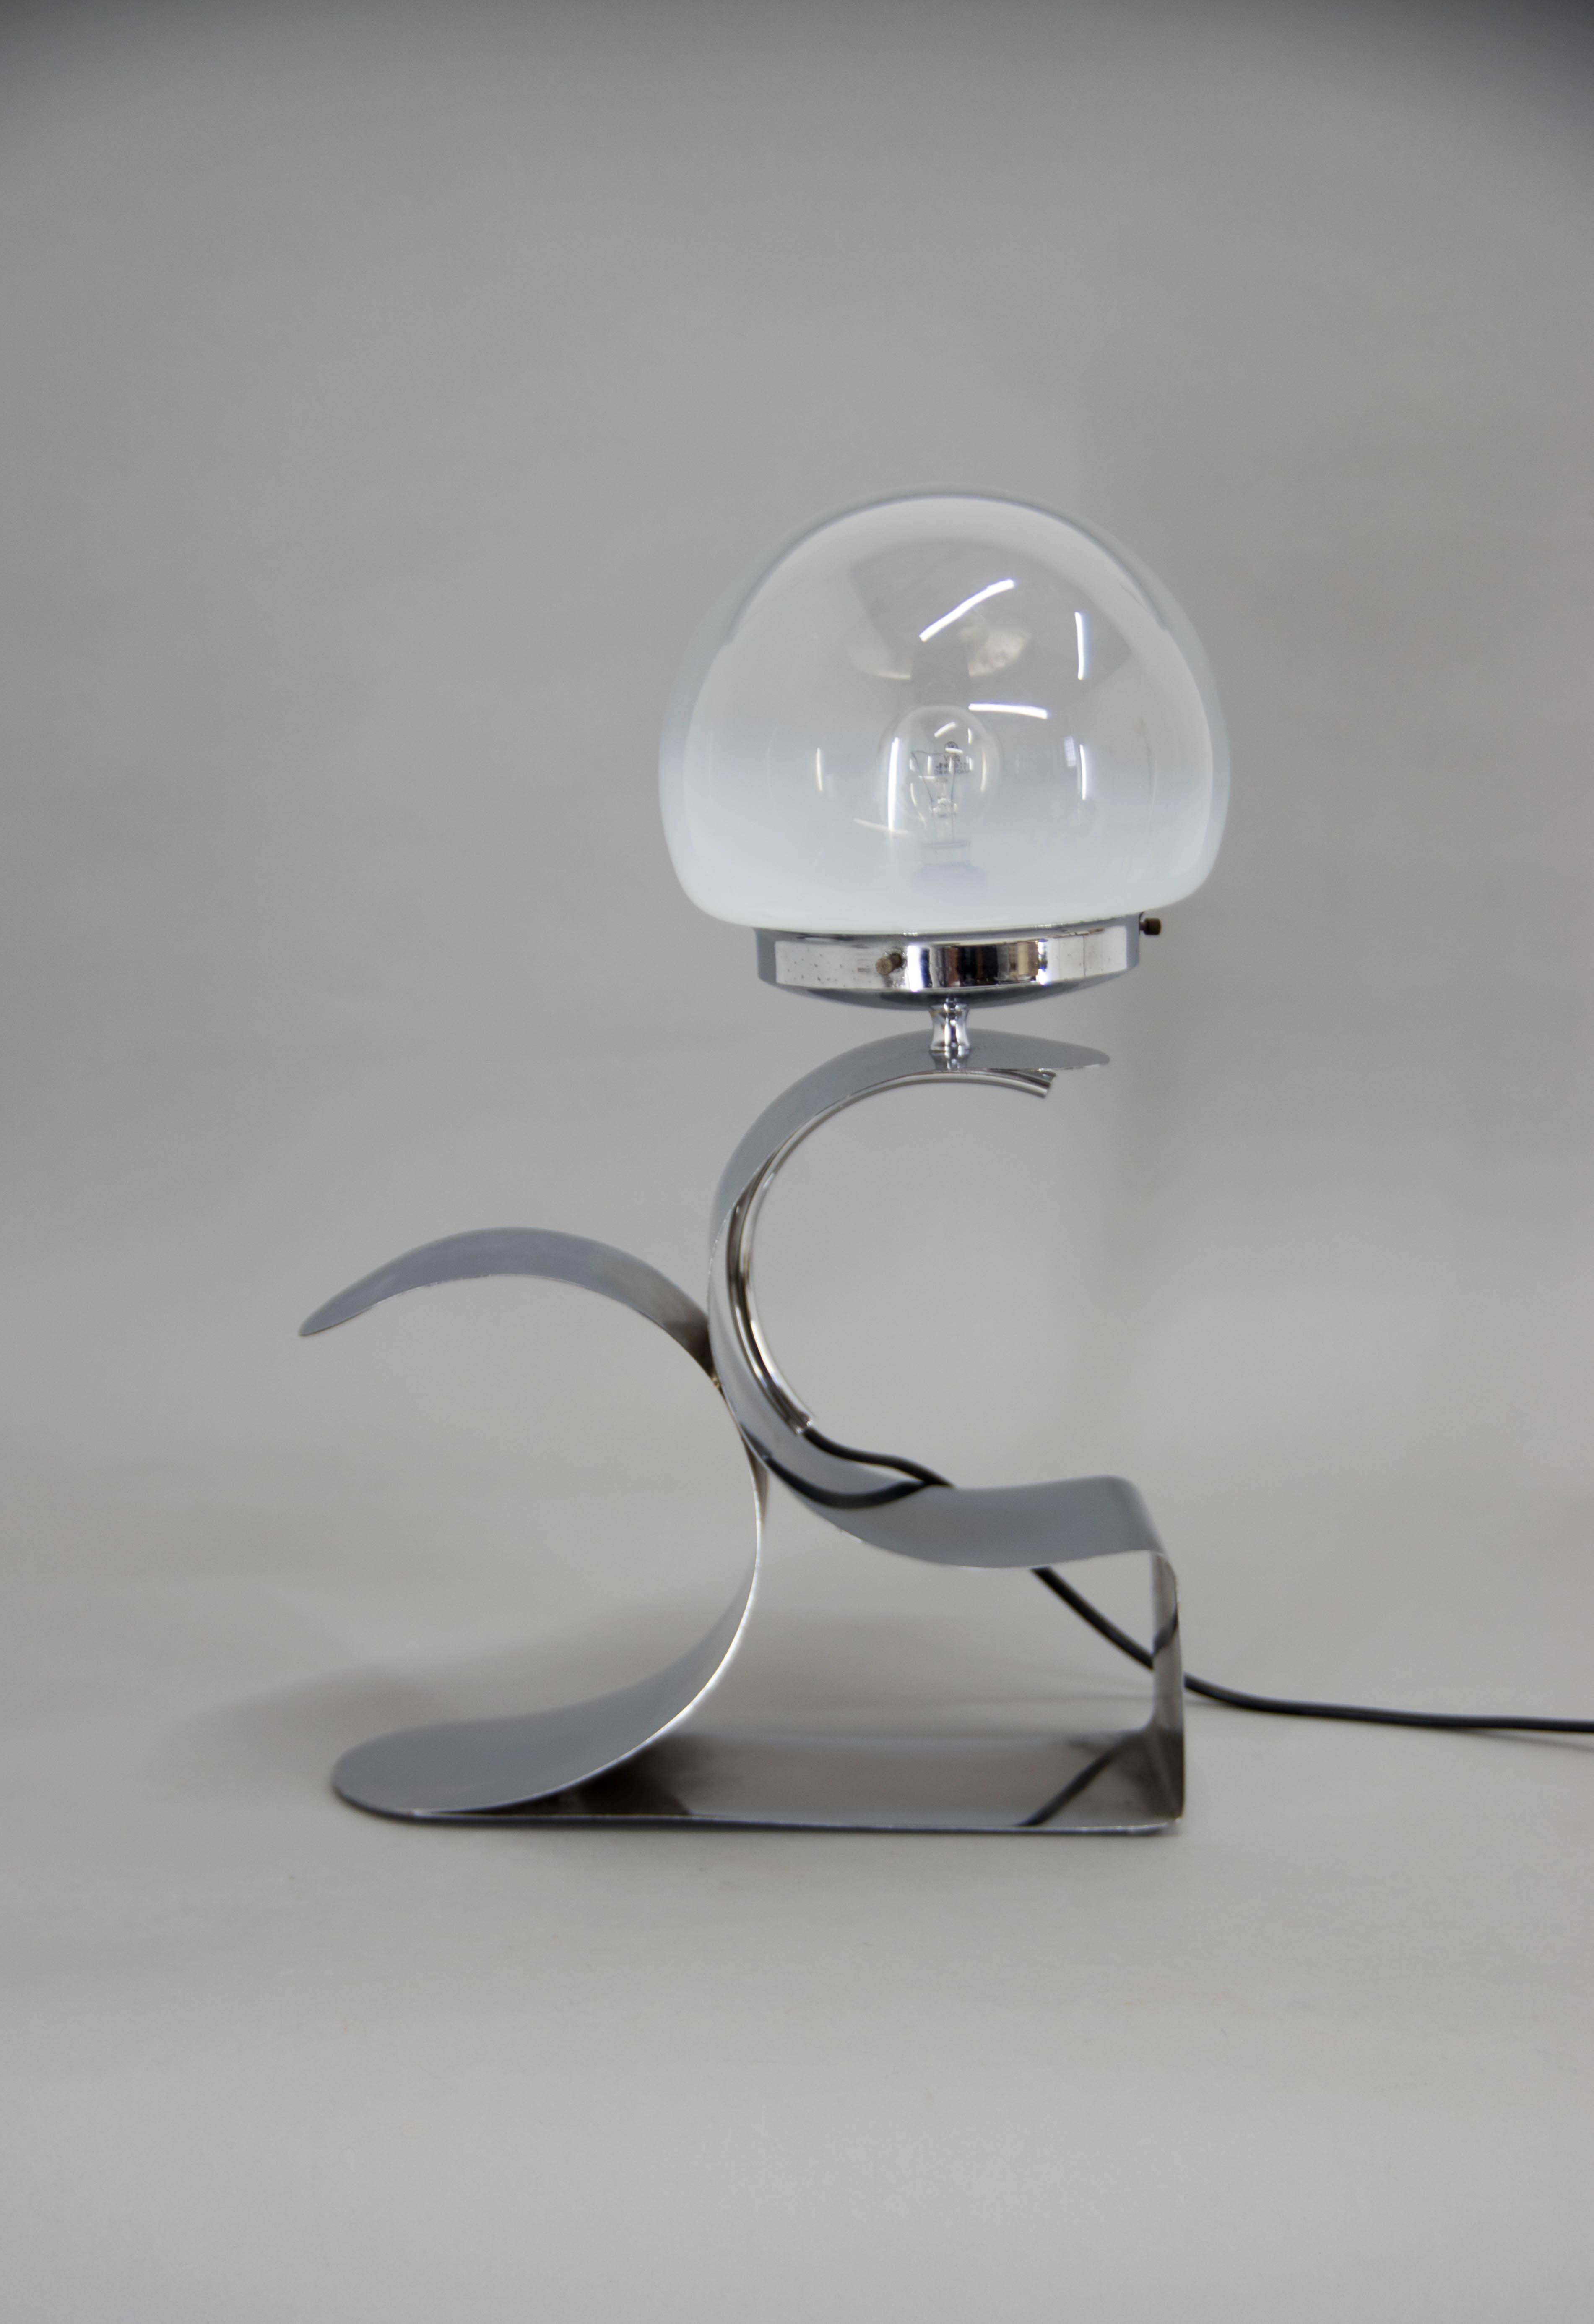 Eye-catching design lamp with chrome-plated base and murano glass shade.
Very good original condition.
1x40W, E12-E14 bulb.
US plug adapter included.